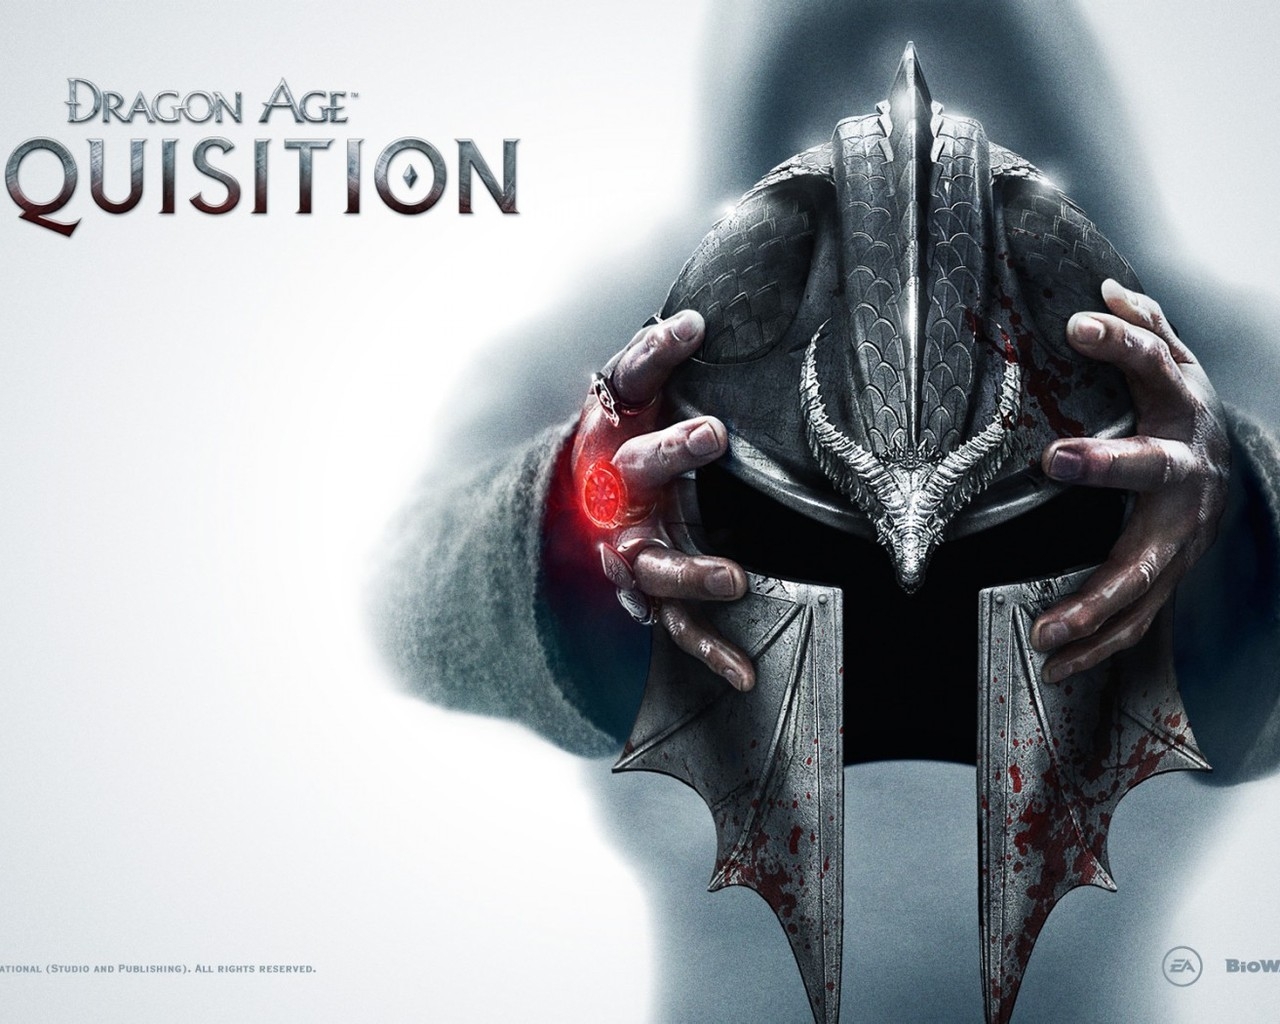 Dragon Age Inquisition Poster for 1280 x 1024 resolution